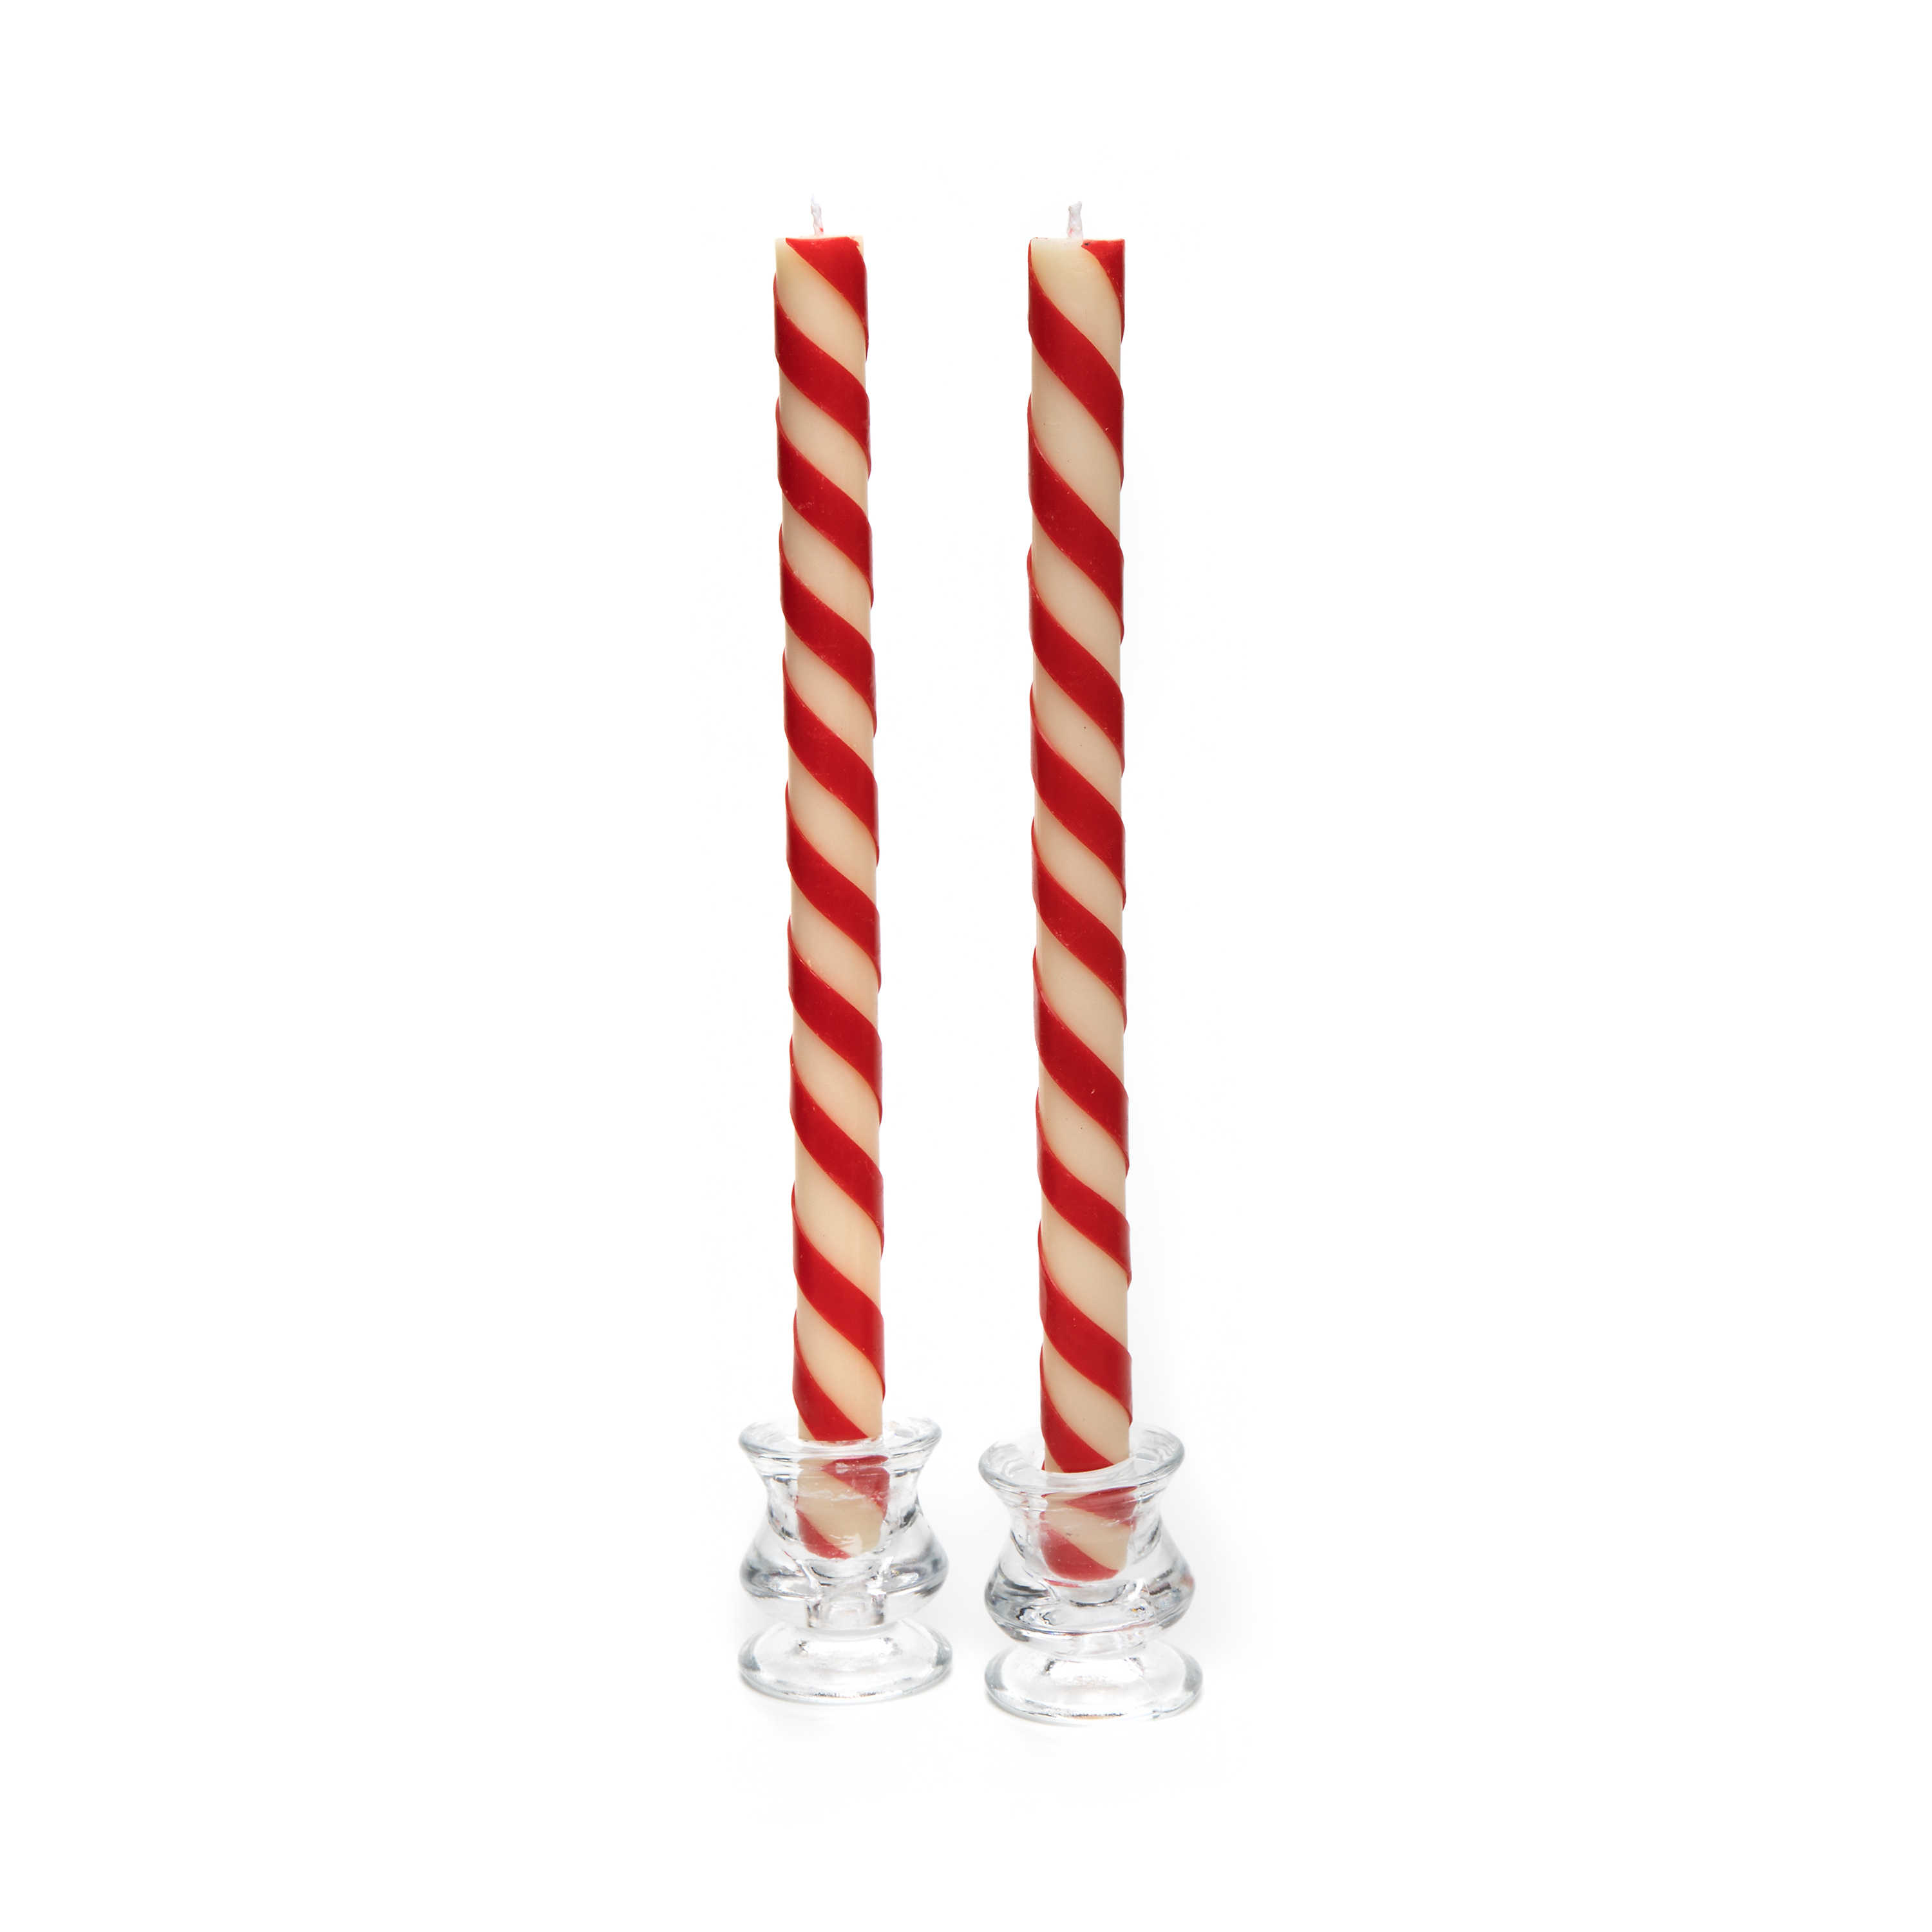 Candy Cane Dinner Candles - Set of 2 mackenzie-childs Panama 0